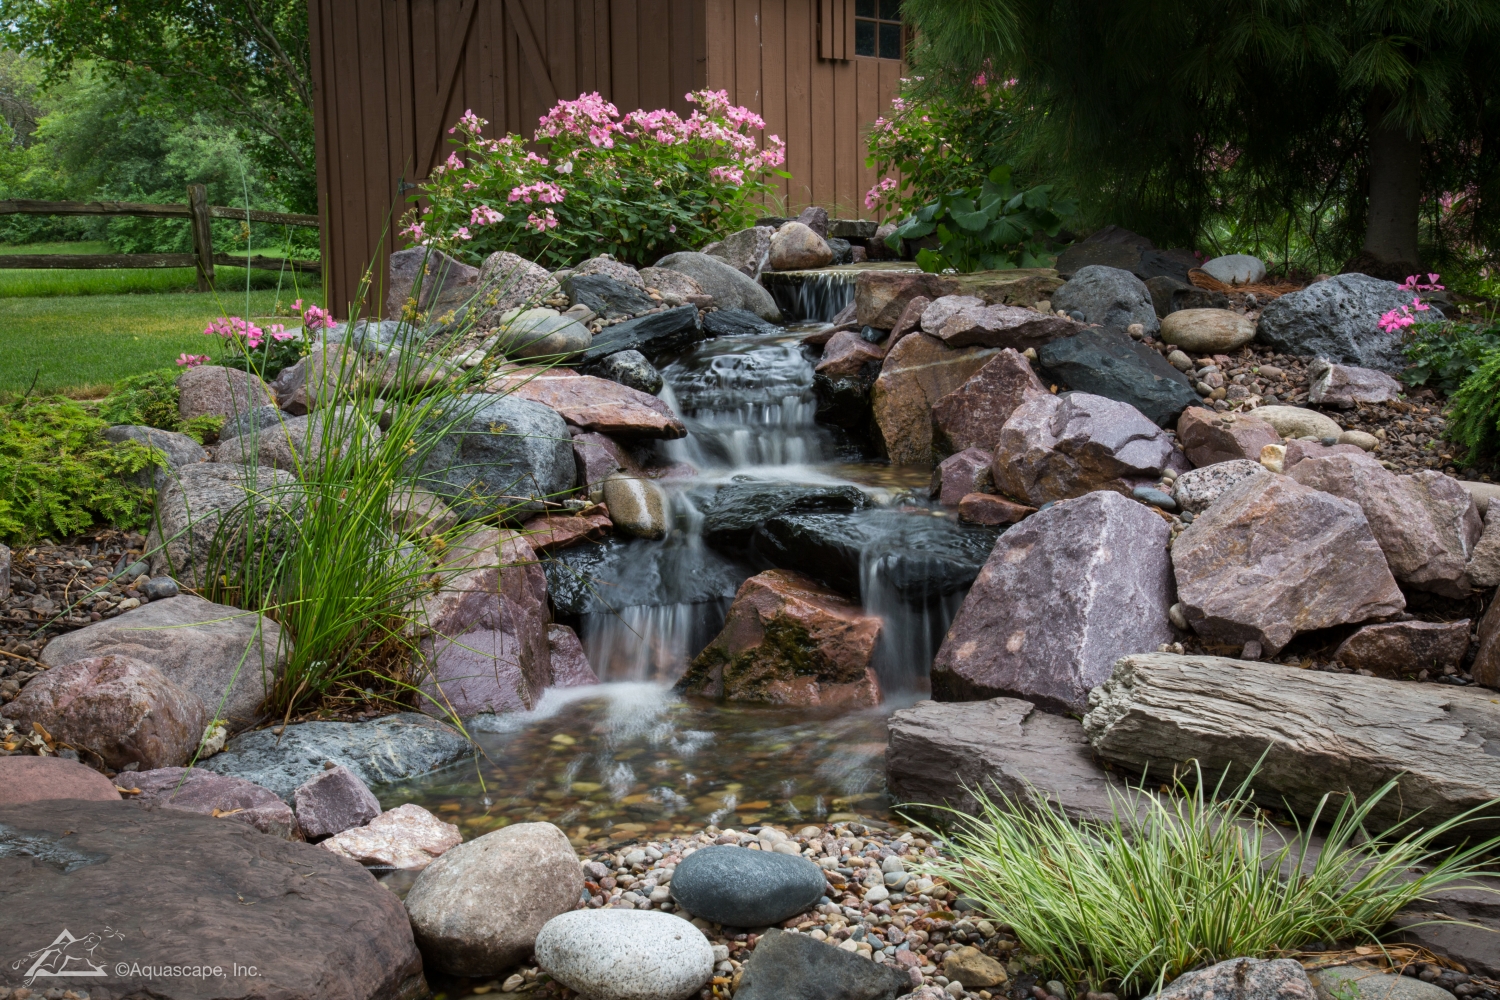 Pondless Waterfall Design & Construction Tips for Beginners